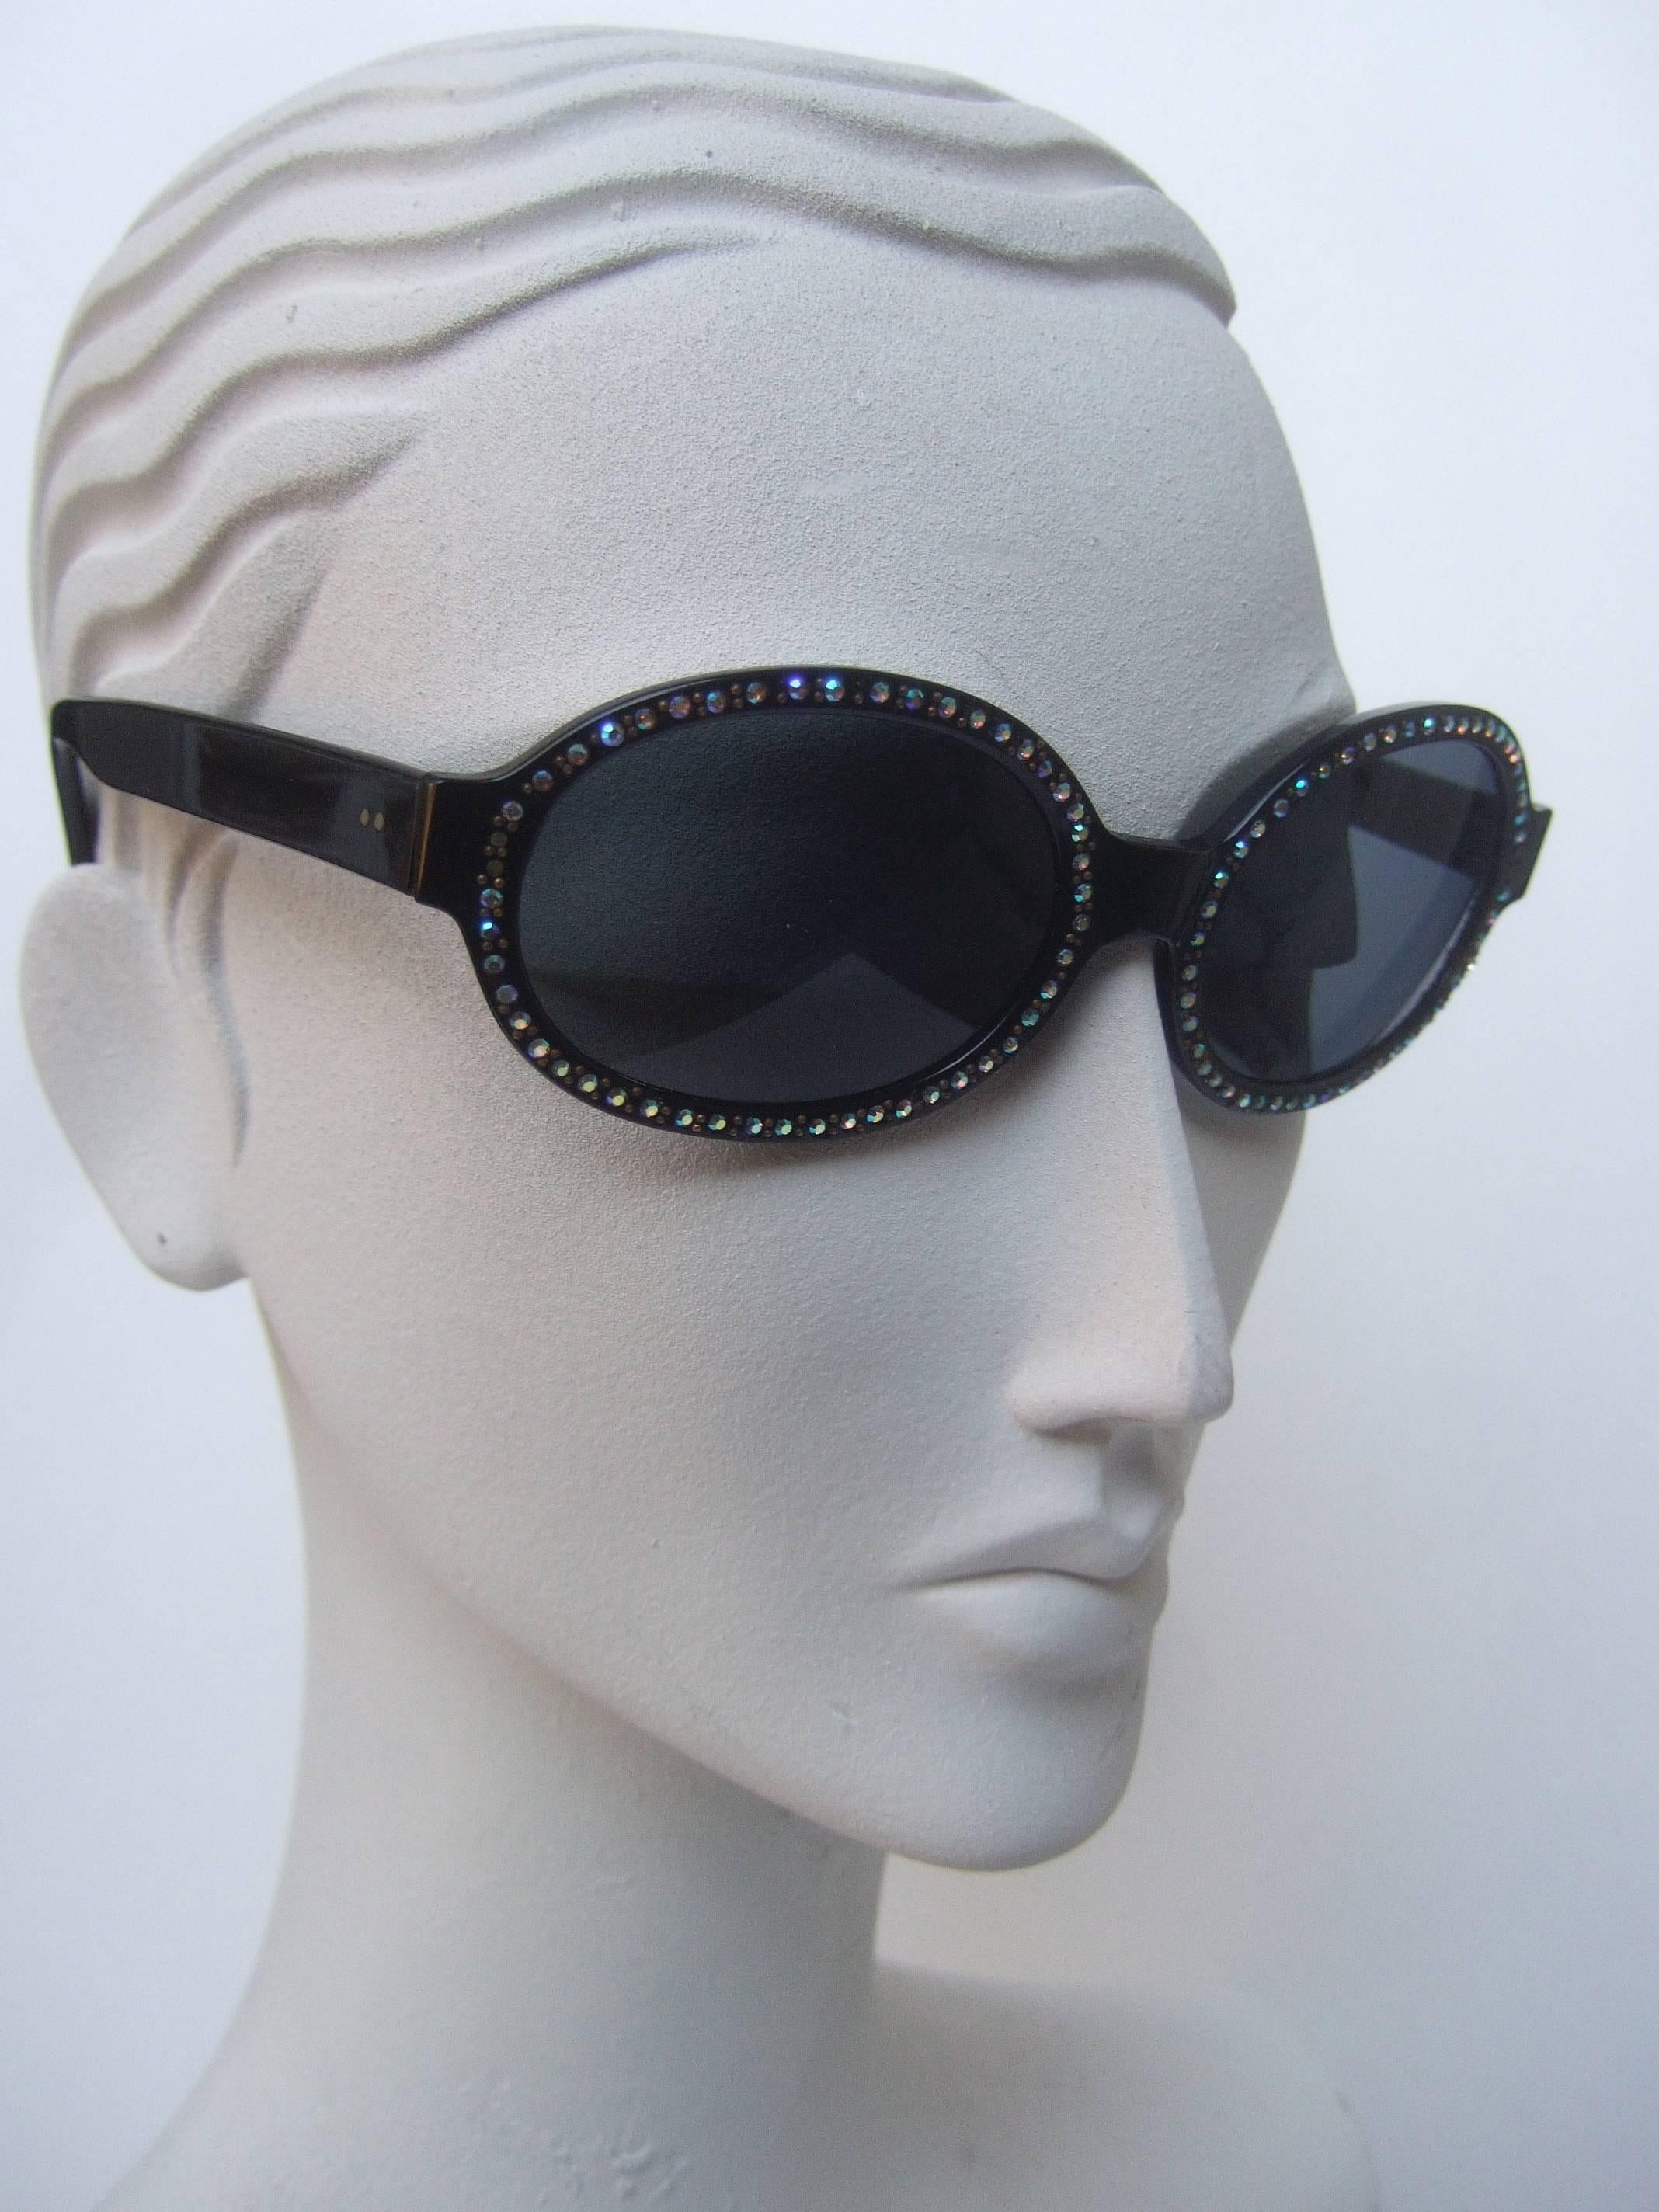 Women's Chic Black Crystal Trim Tinted Sunglasses Made in France c 1970